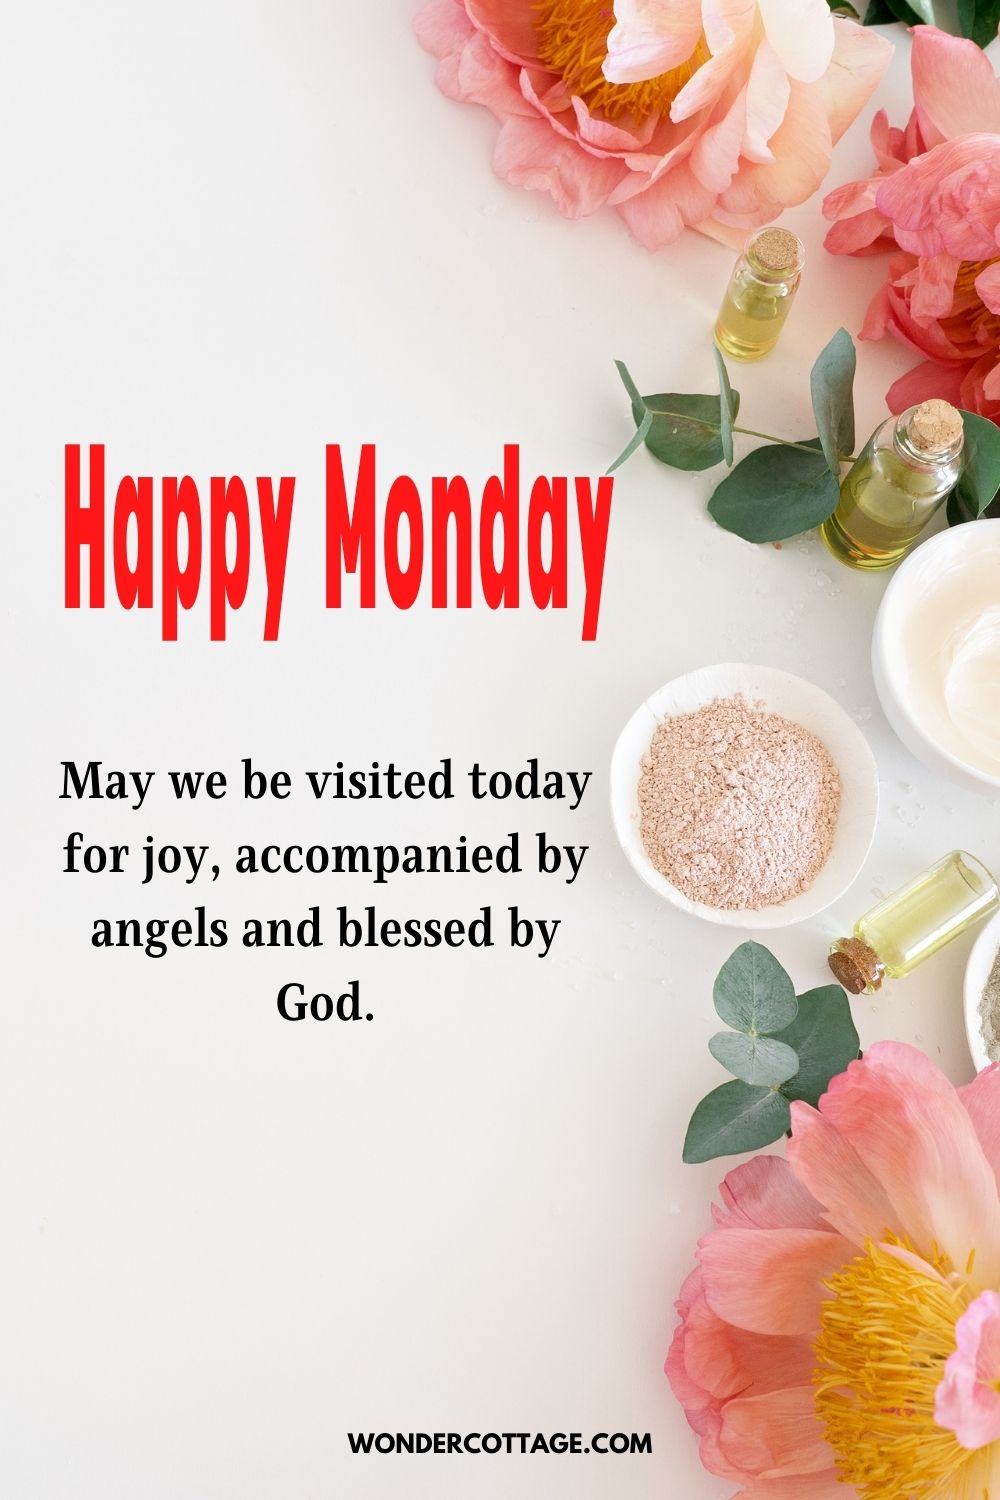 Happy Monday! May we be visited today for joy, accompanied by angels and blessed by God.